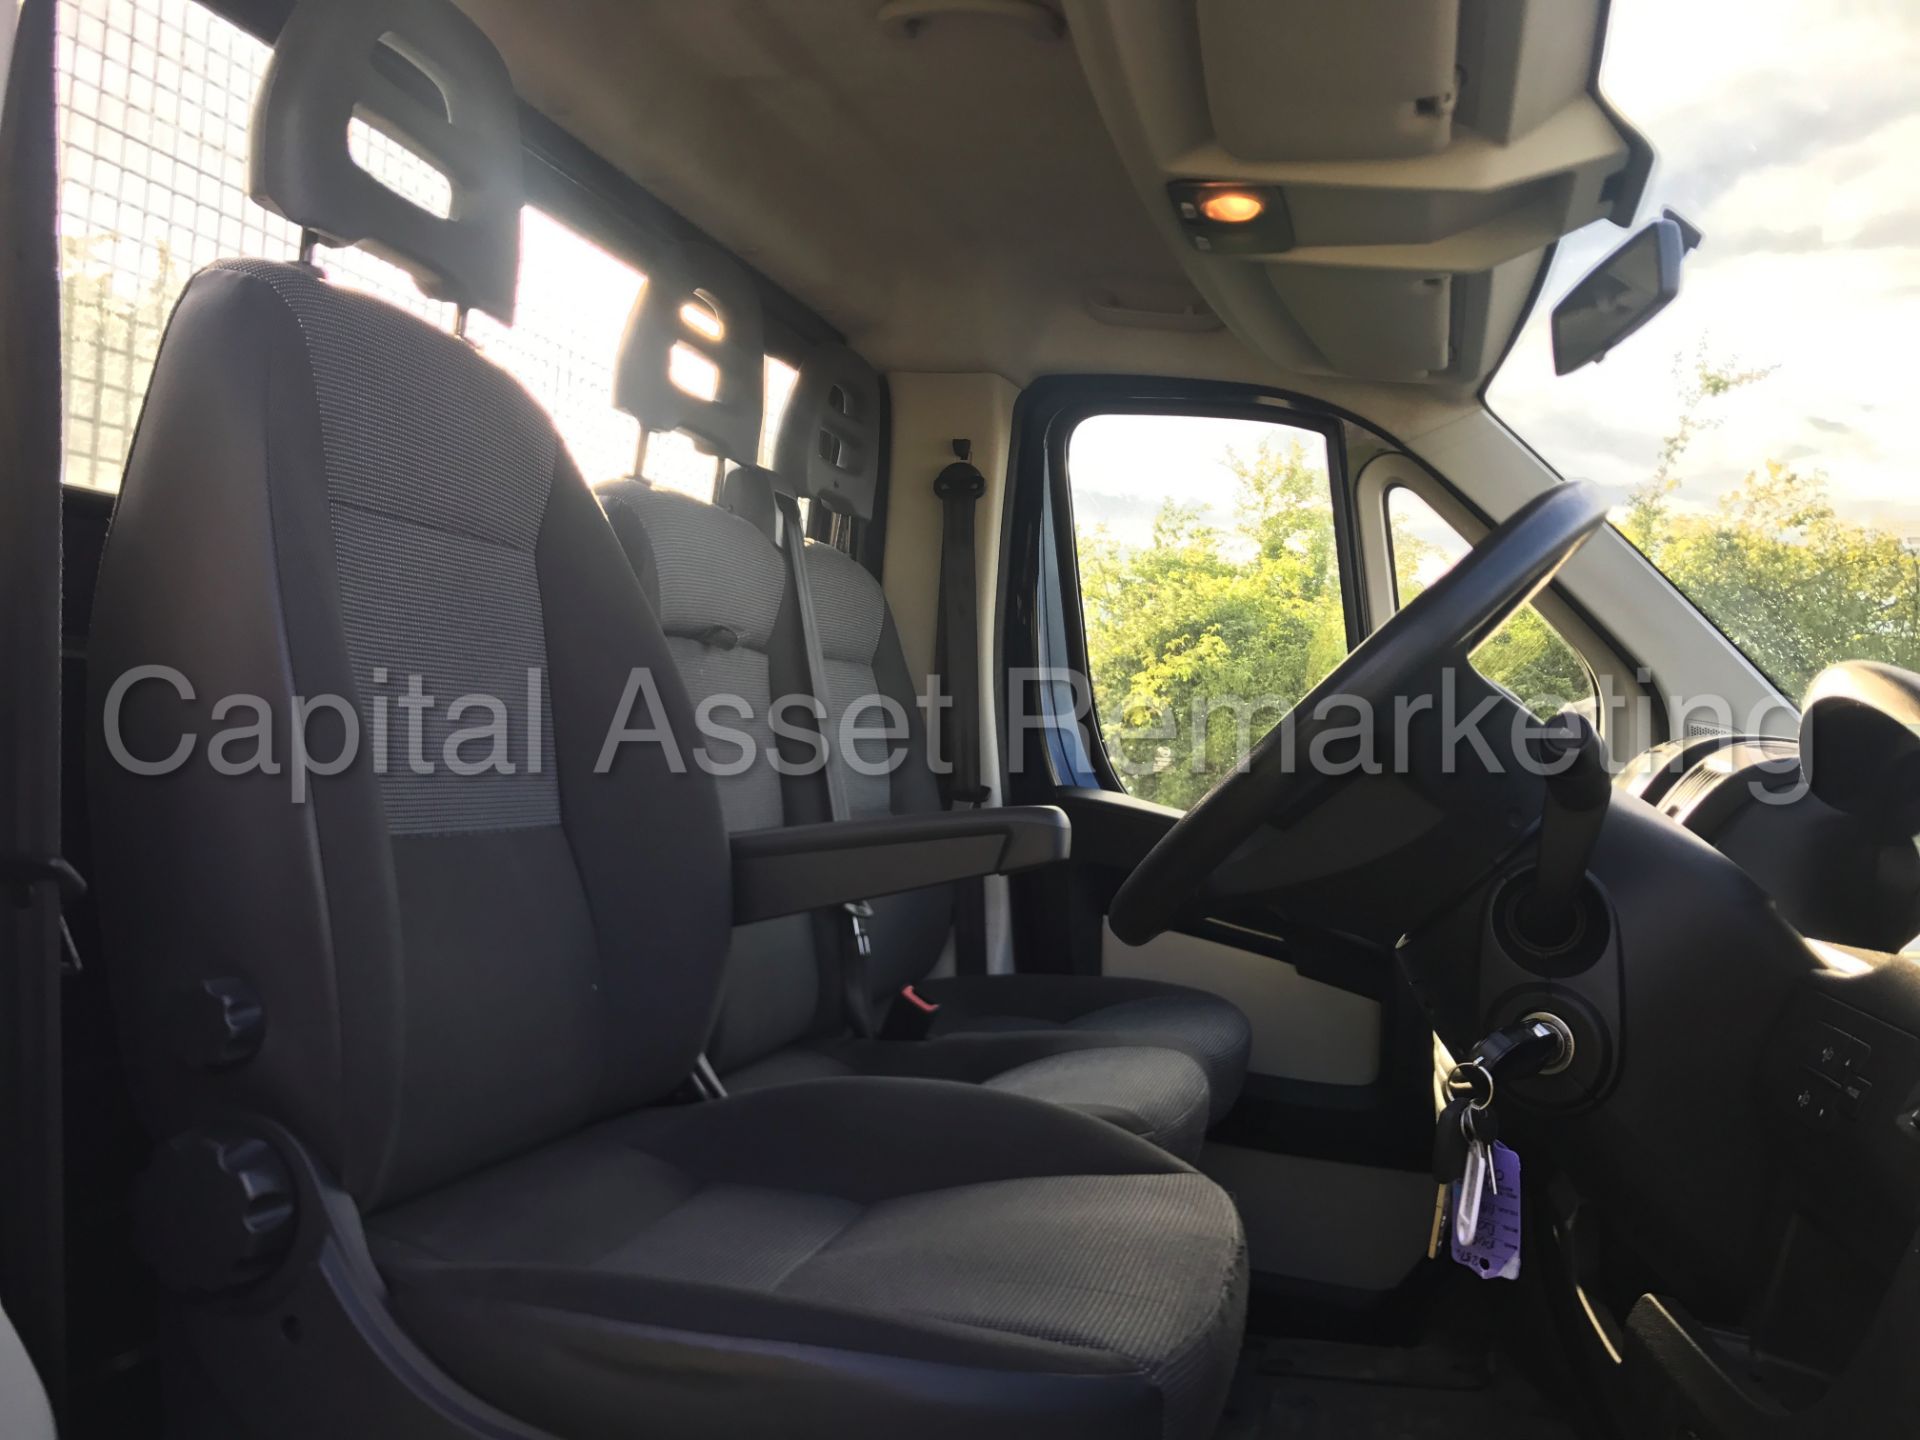 PEUGEOT BOXER 'L3 LWB - 13 FT FLATBED' (2014 MODEL) 2.2 HDI - 130 BHP - 6 SPEED' (1 COMPANY OWNER) - Image 17 of 21